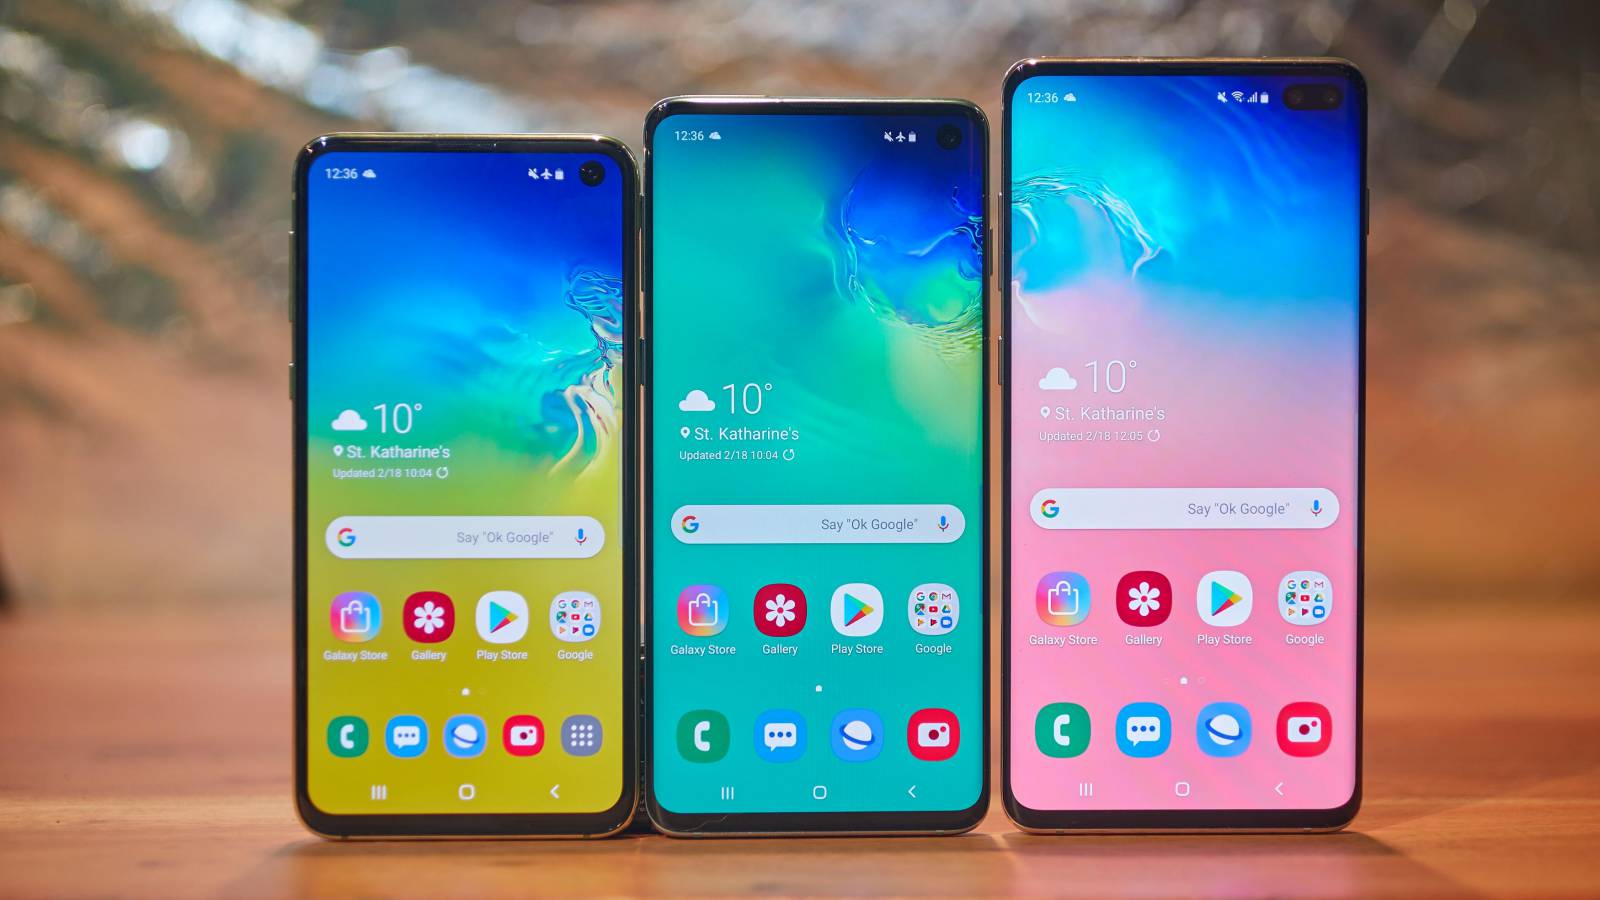 Samsung GALAXY S10 brings Samsung to a DESPERATE situation